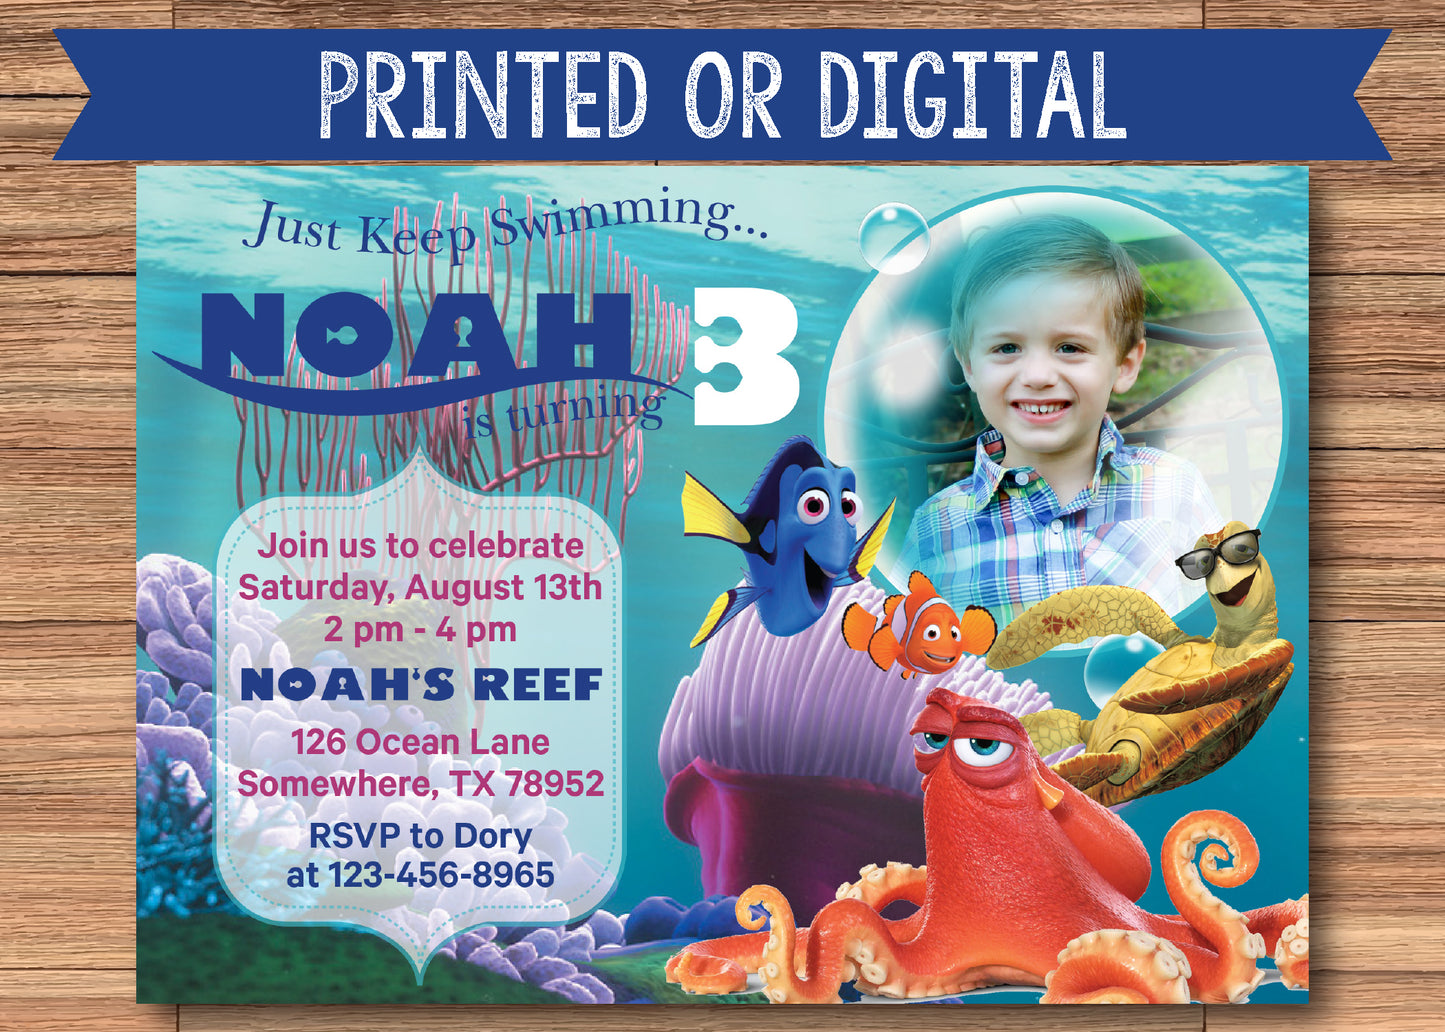 Finding Nemo Printed or Digital Invitation with Photo! Nemo, Dory, Squirt, Crush!